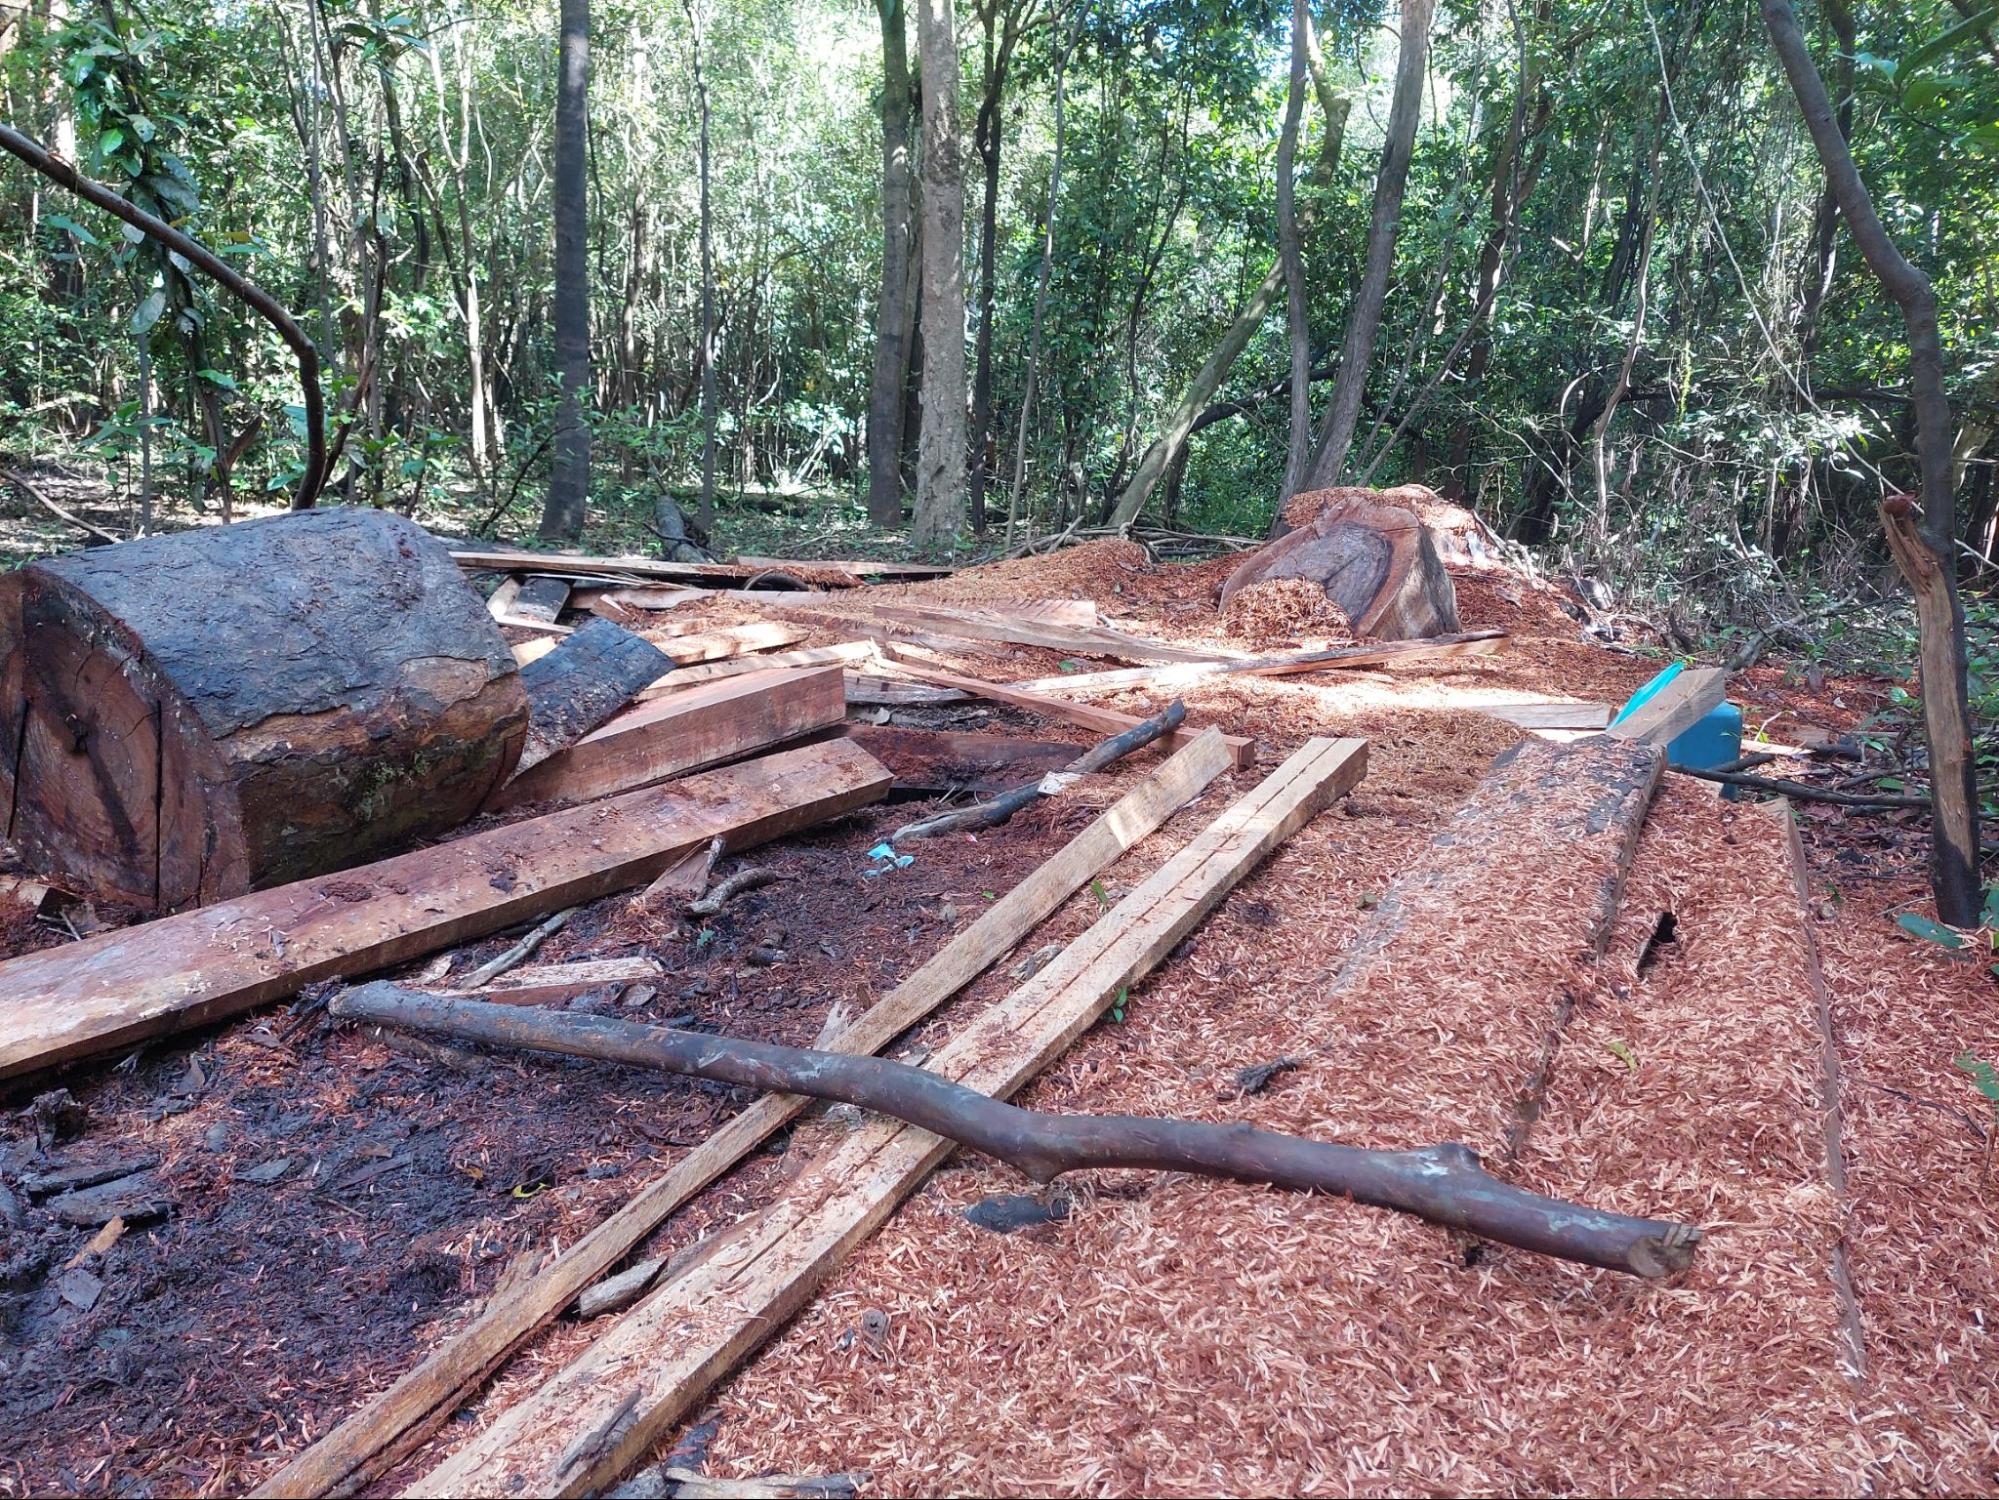 A look at our project’s recent community action for Amazon Rainforest Day